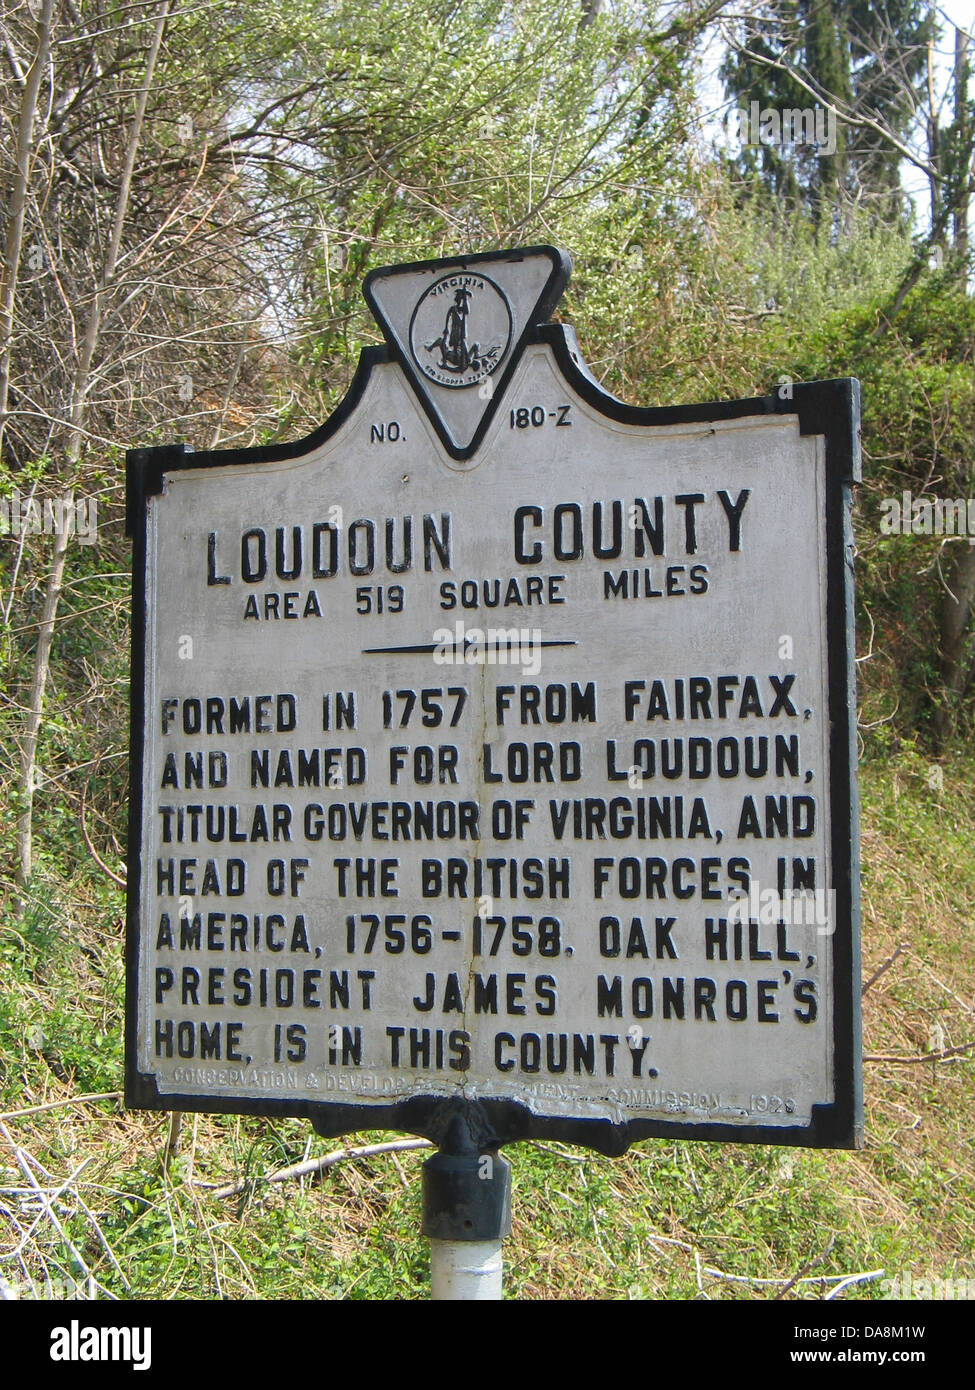 LOUDOUN COUNTY Area 519 Square Miles Formed in 1757 from Fairfax, and named for Lord Loudoun, titular Governor of Virginia, and head of the British forces in America, 1756-1758. Oak Hill, President James Monroe's home is in this county. Conservation & Development Commission, 1929. Stock Photo